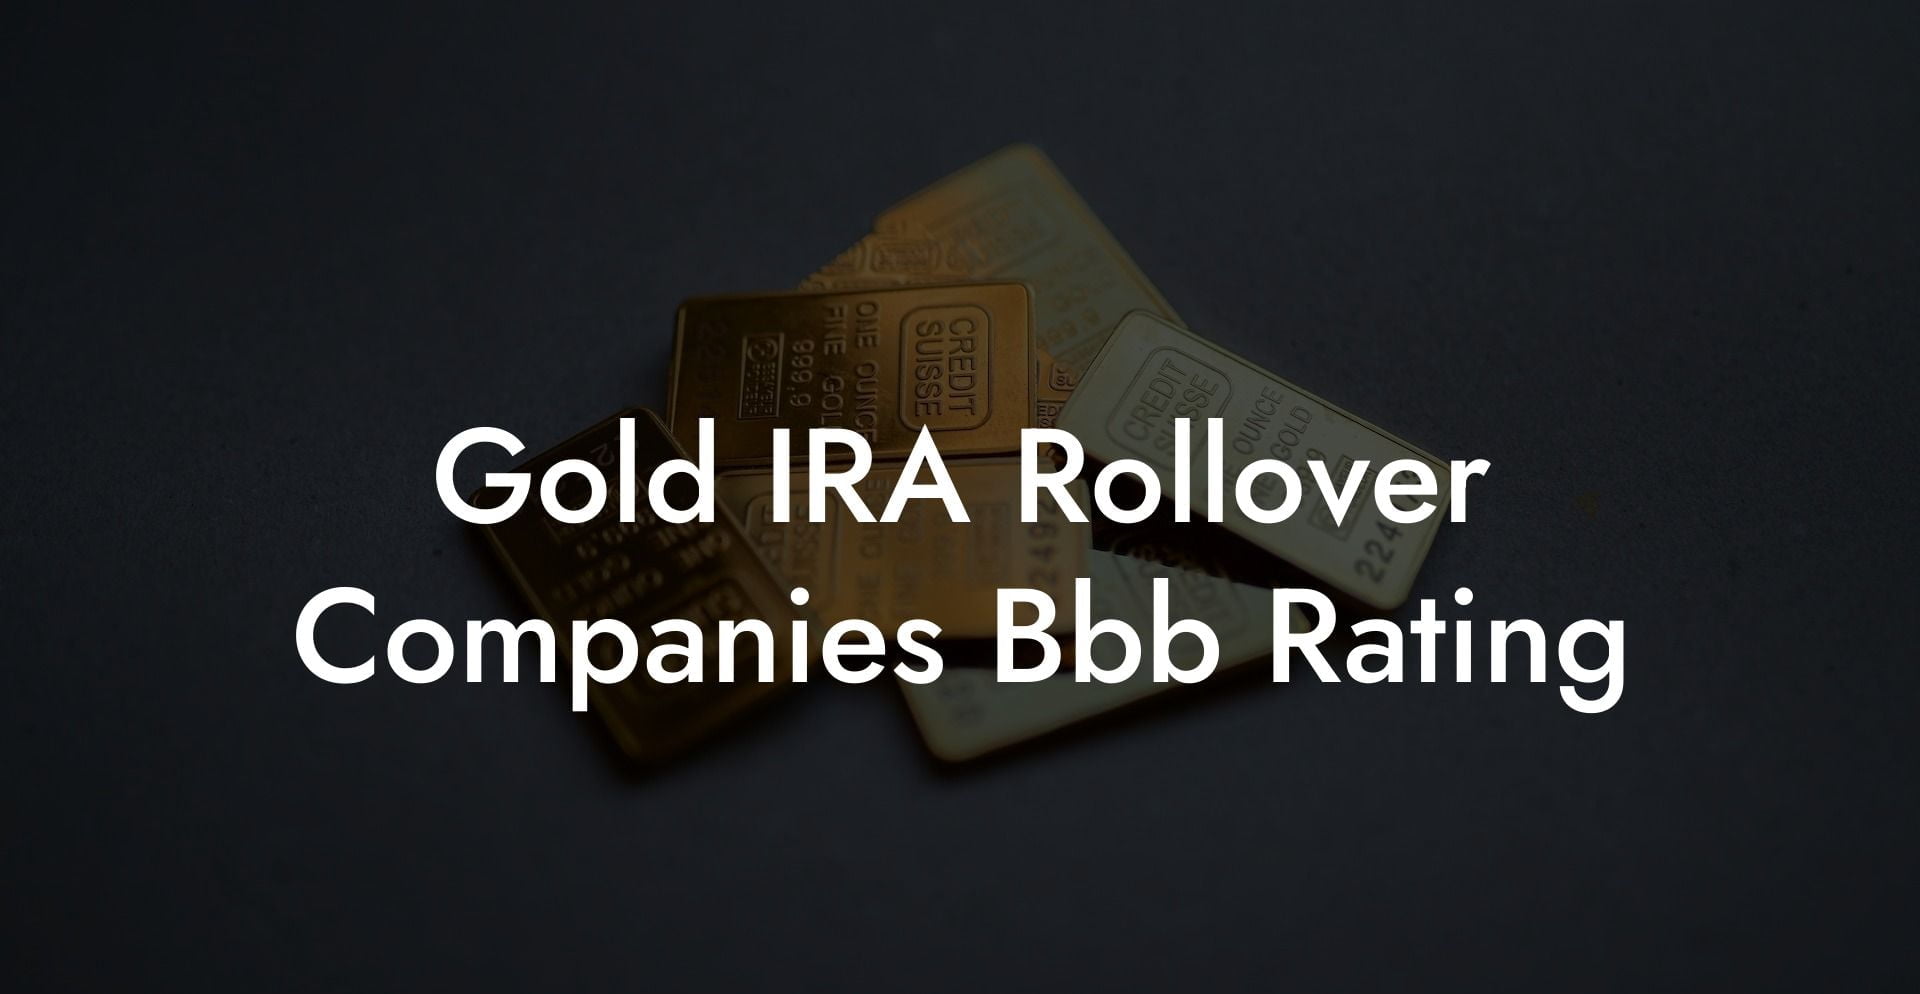 Gold IRA Rollover Companies Bbb Rating